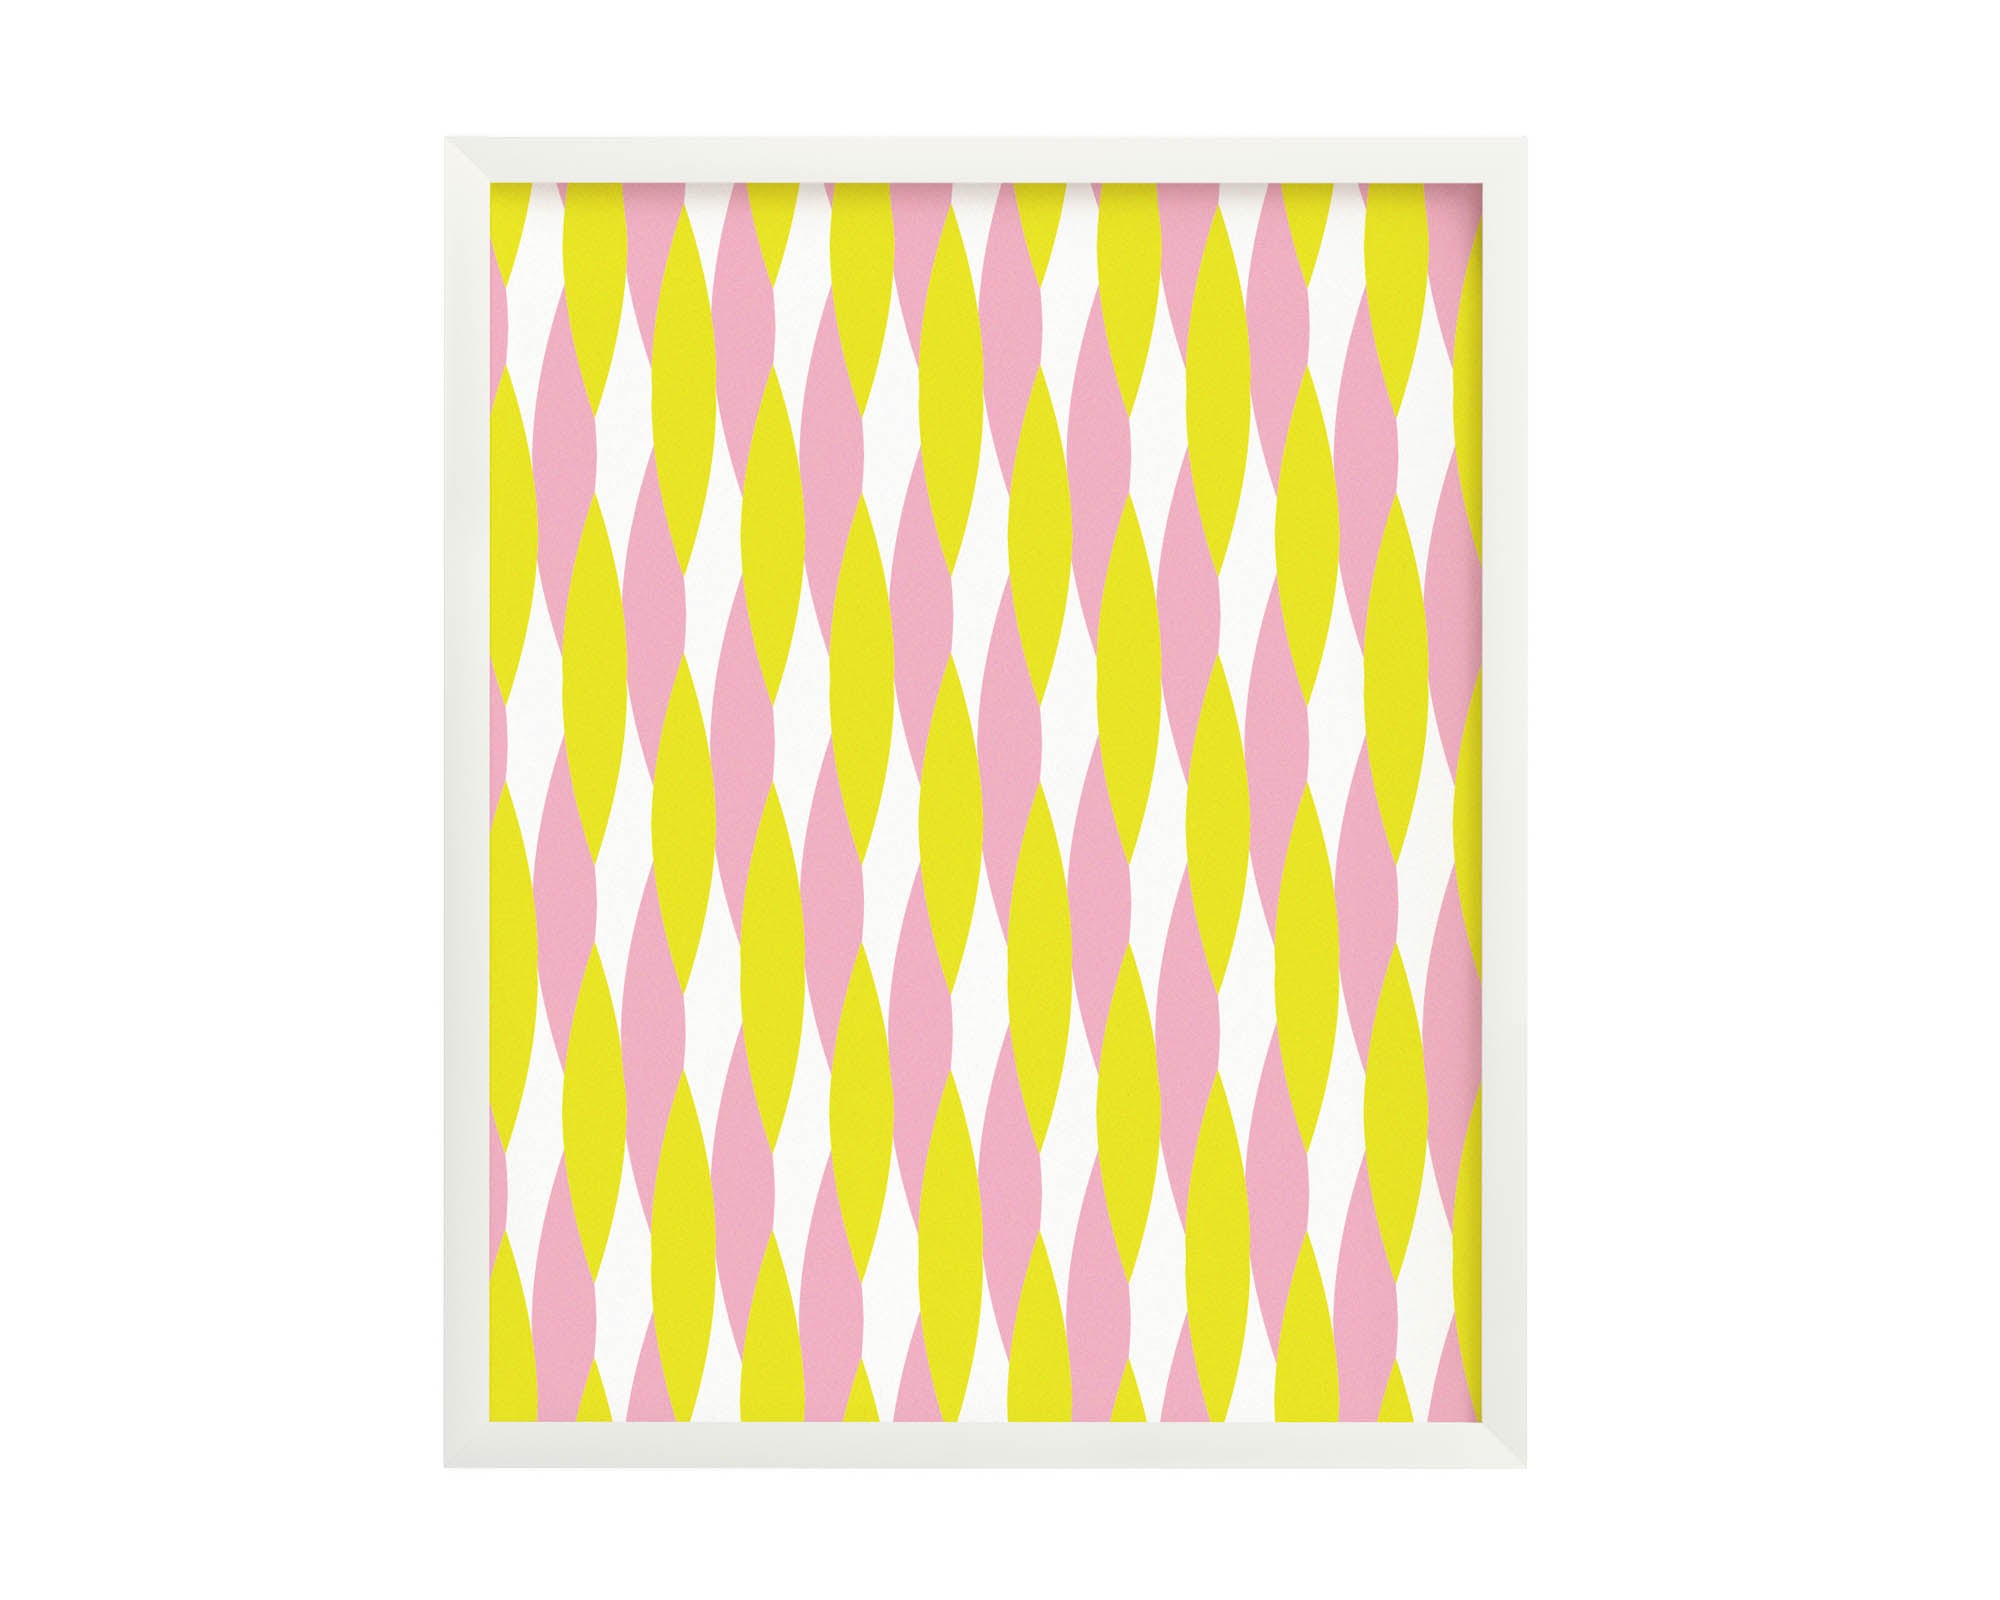 "Twist" colorful, graphic, twisted archival giclée art print. Made in USA by My Darlin' @mydarlin_bk